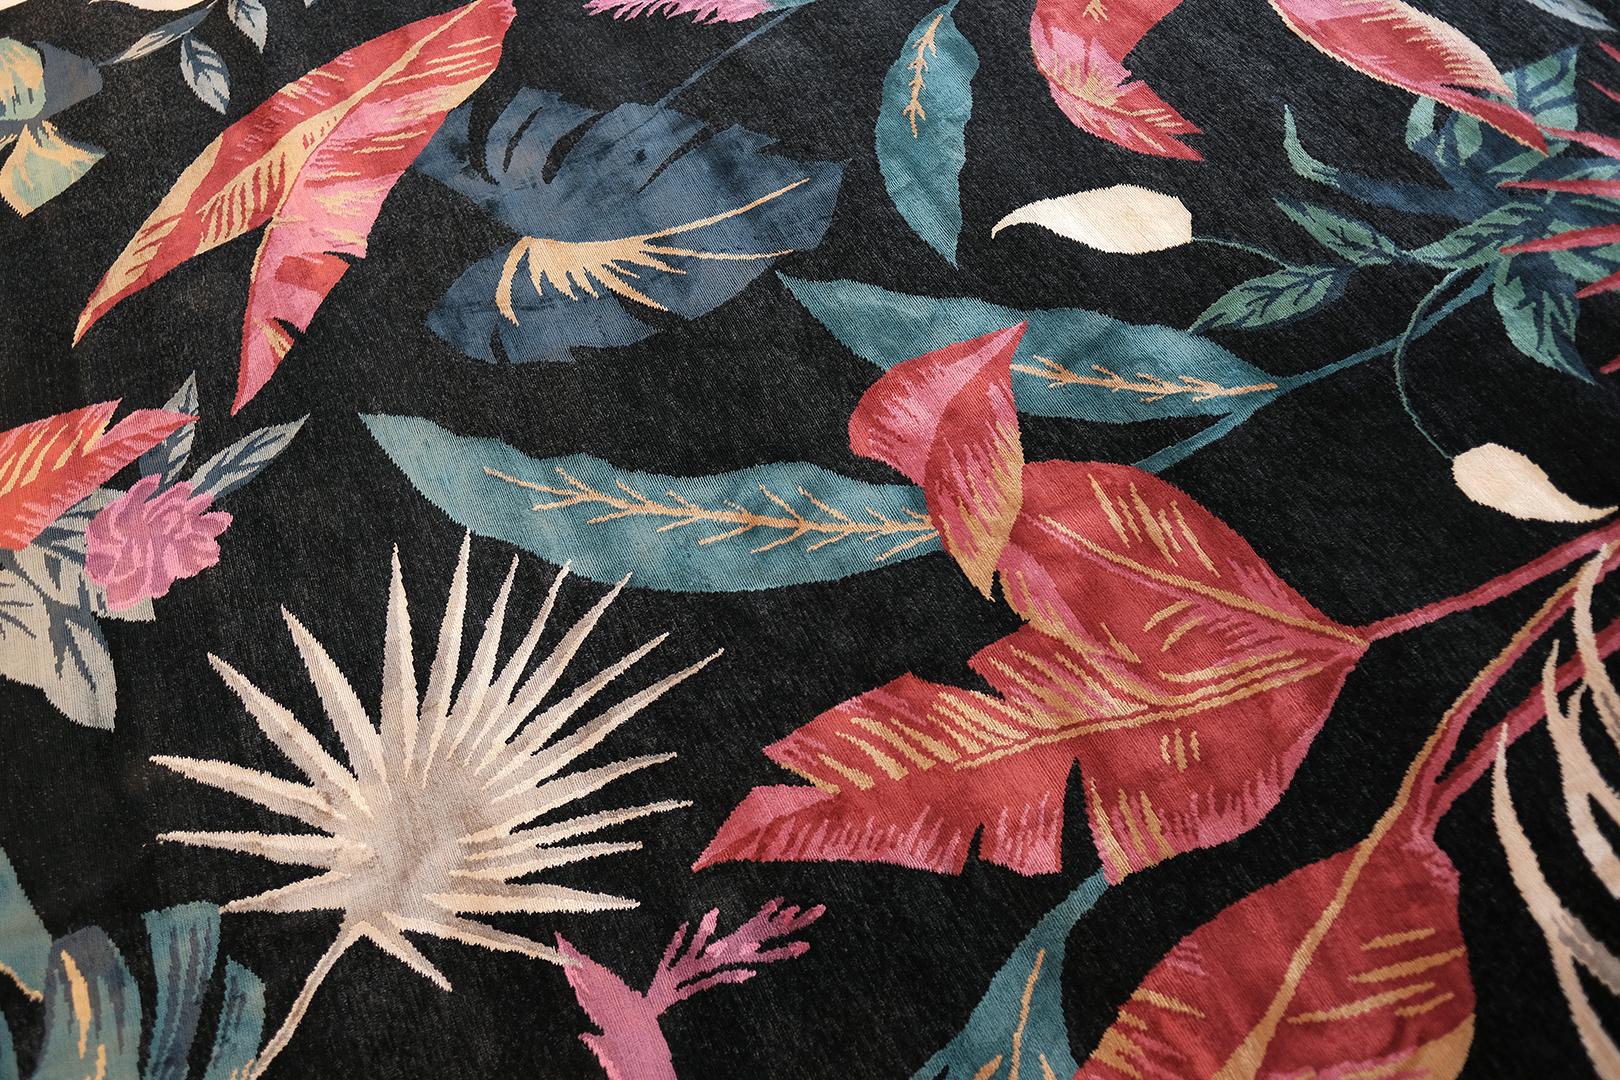 Over a year in design, “Fearful Symmetry” is a particularly Southern California expression. Liesel painted more than a dozen American botanicals. One seems to be peering through the blades of palm fronds and over broad leaves and ginger stems.